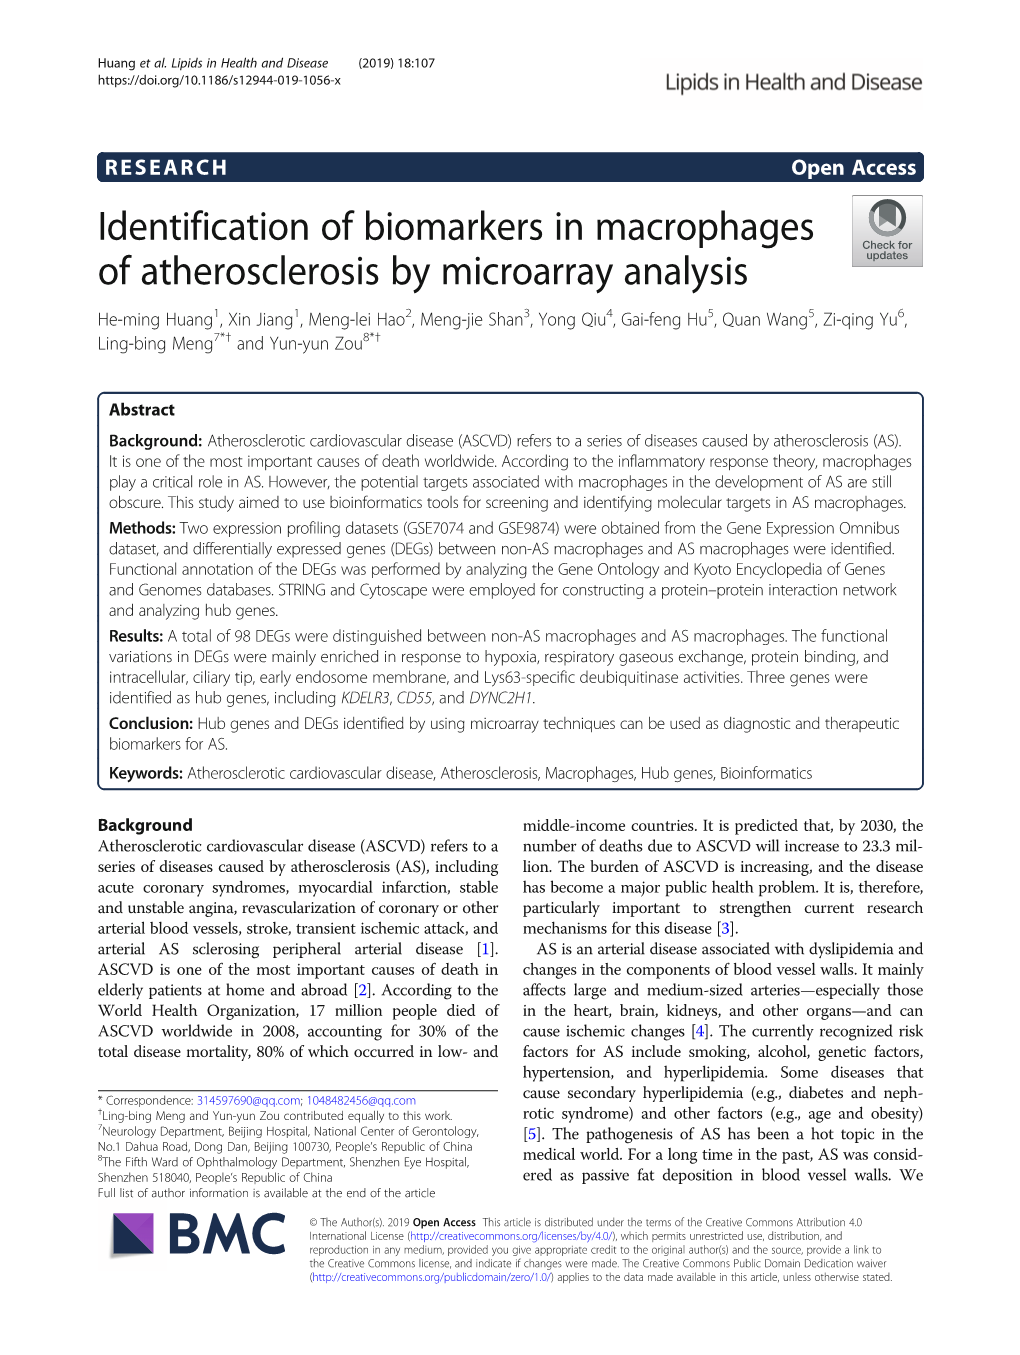 Identification of Biomarkers in Macrophages of Atherosclerosis By